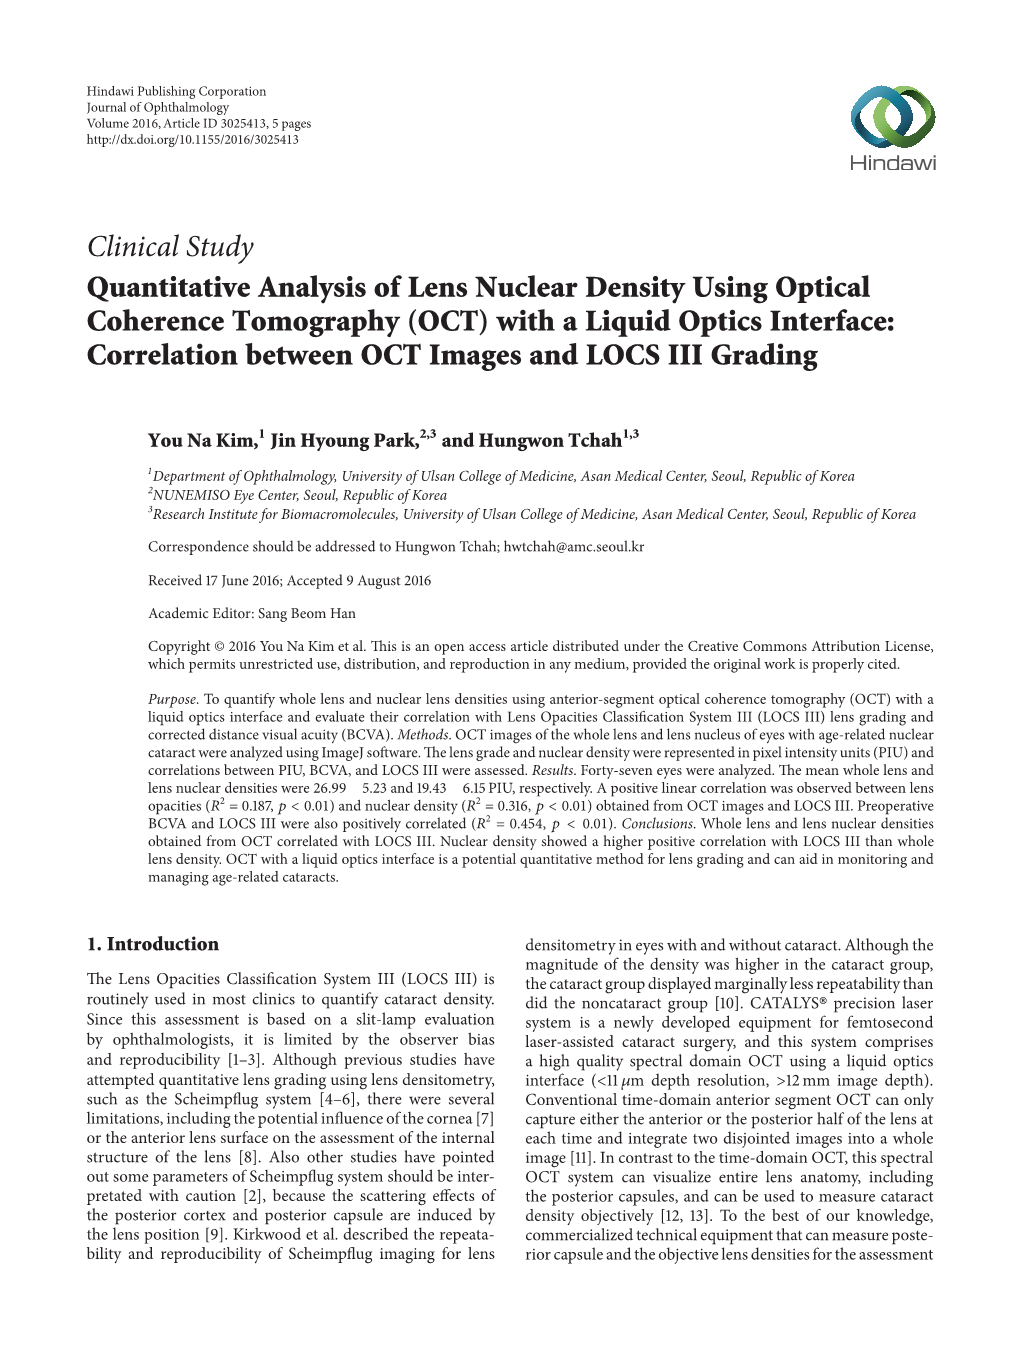 Quantitative Analysis of Lens Nuclear Density Using Optical Coherence Tomography (OCT) with a Liquid Optics Interface: Correlation Between OCT Images and LOCS III Grading